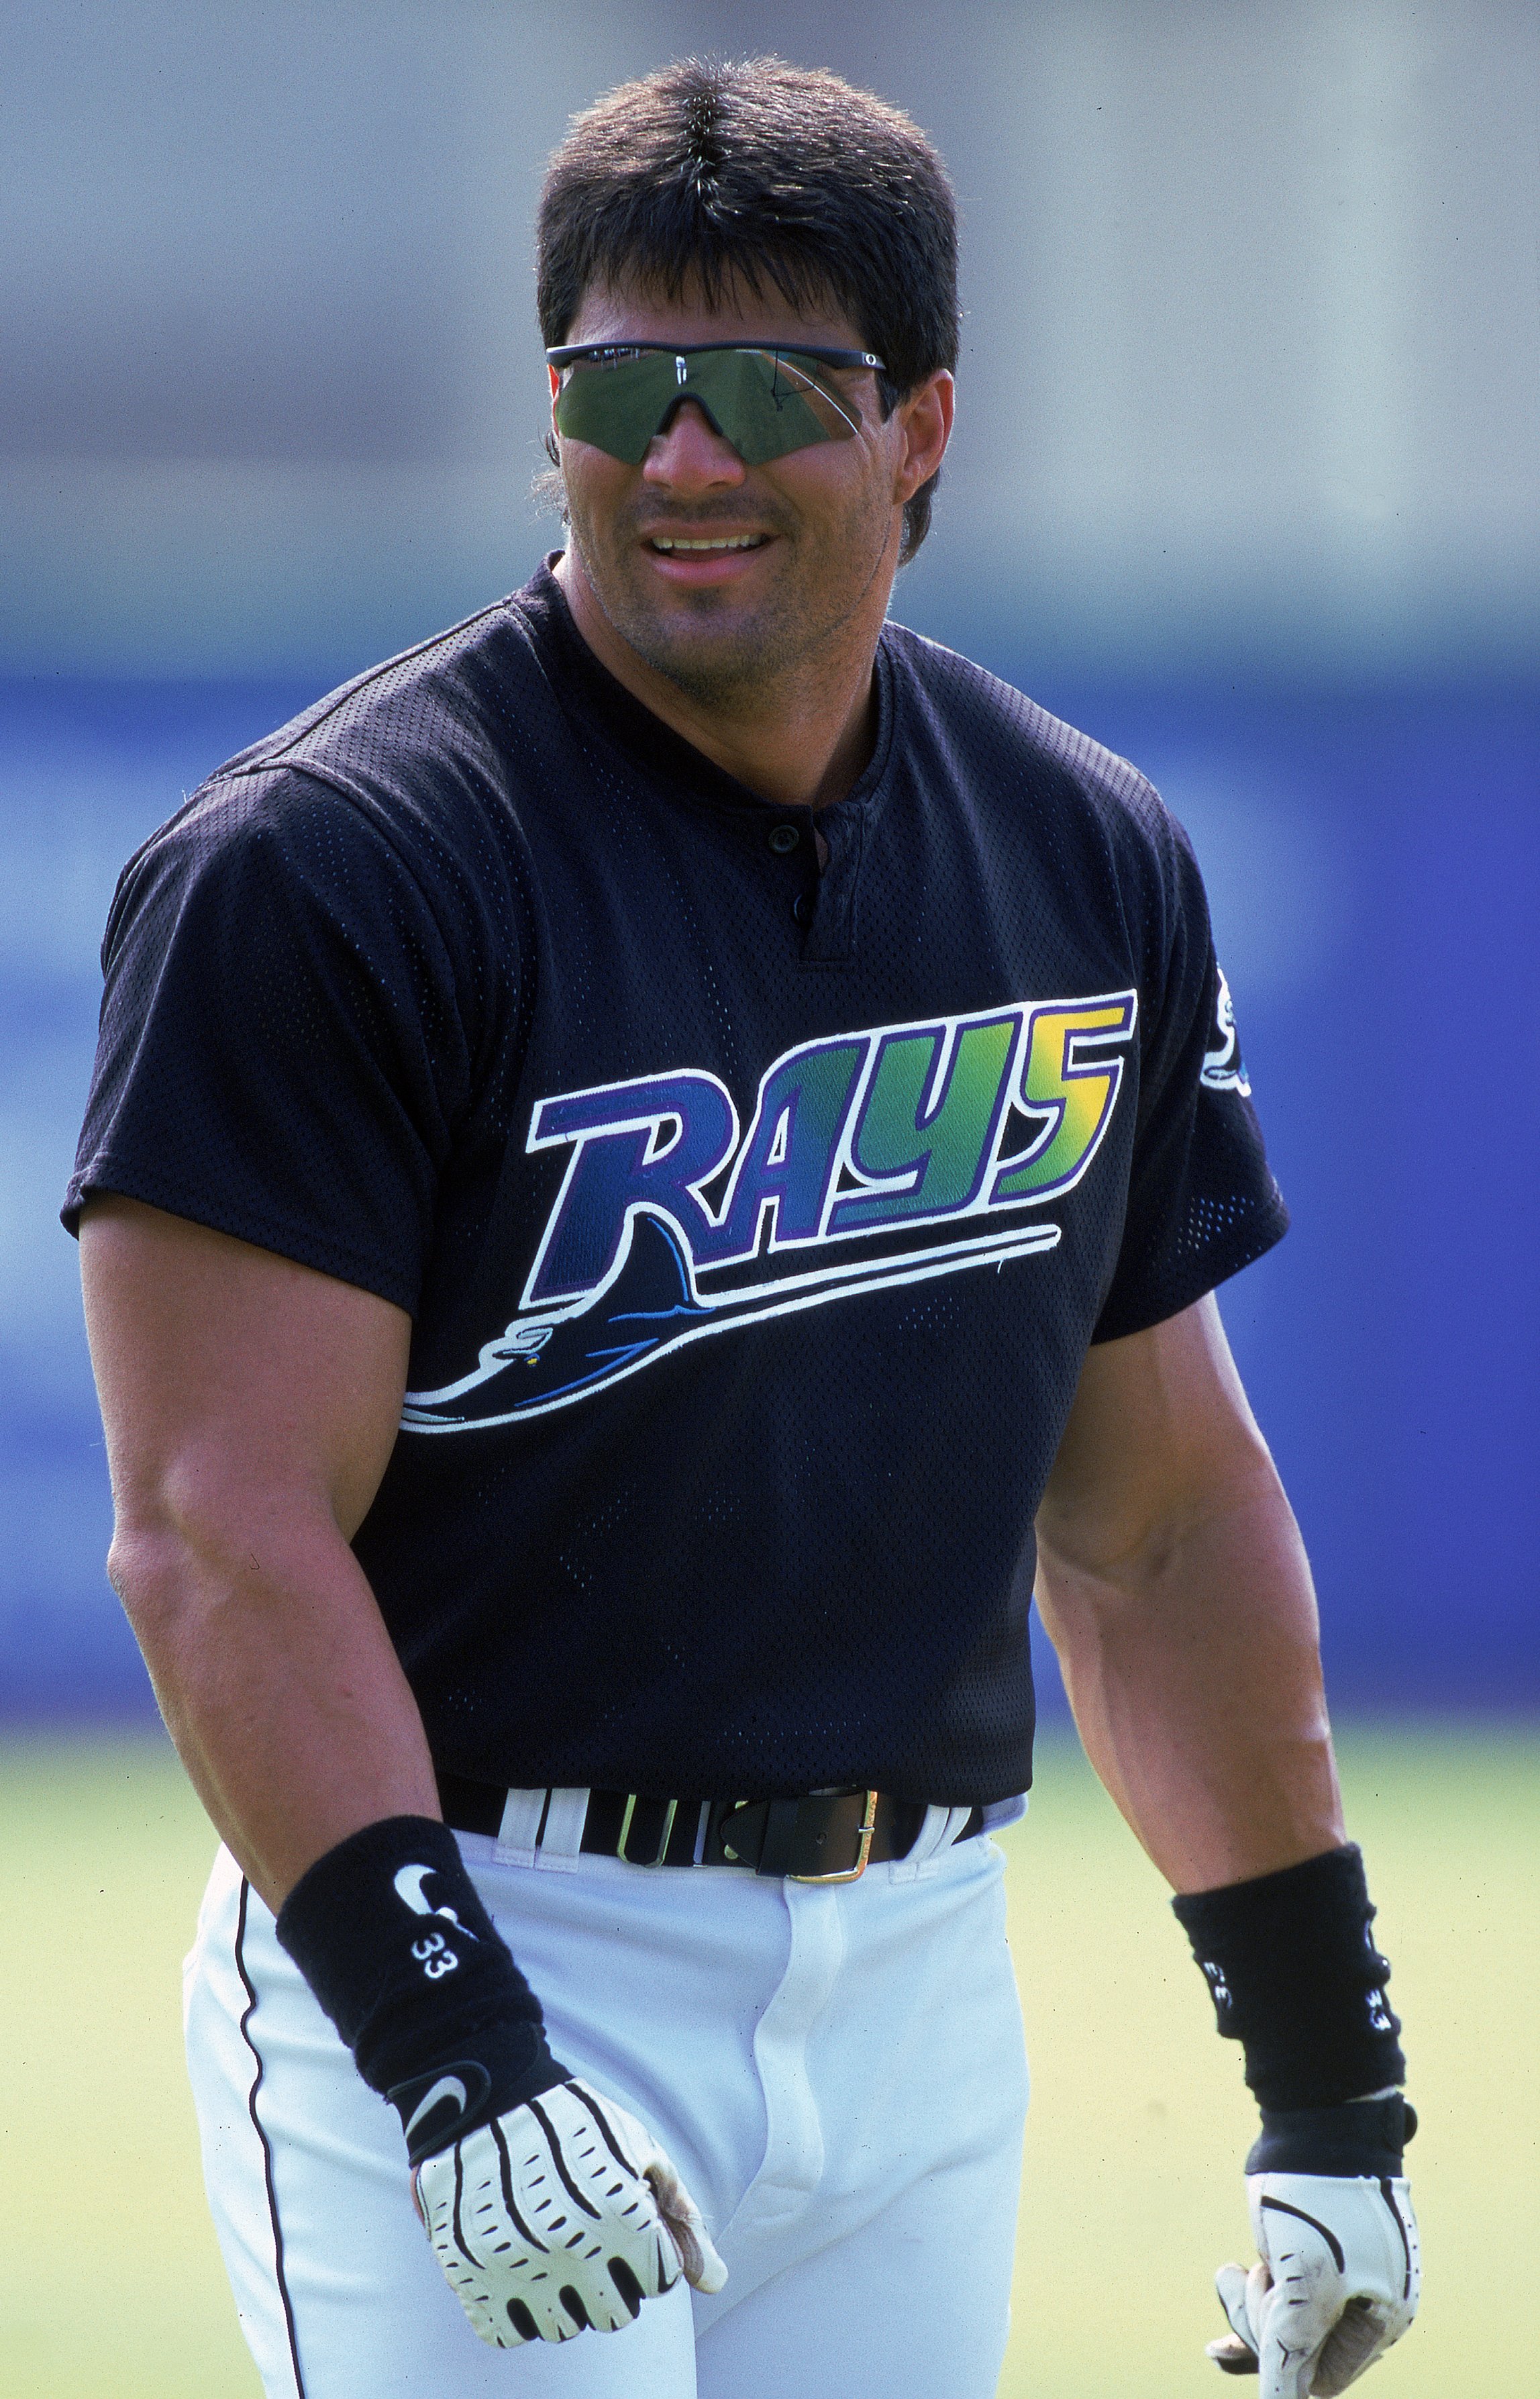 8 Mar 2000: Jose Canseco #33 of the  Tampa Bay Devil Rays smiles as he walks on the field during the Spring Training Game against the Philadelphia Phillies at Florida Power Park in St. Petersburgh, Florida. Mandatory Credit: Scott Halleran  /Allsport